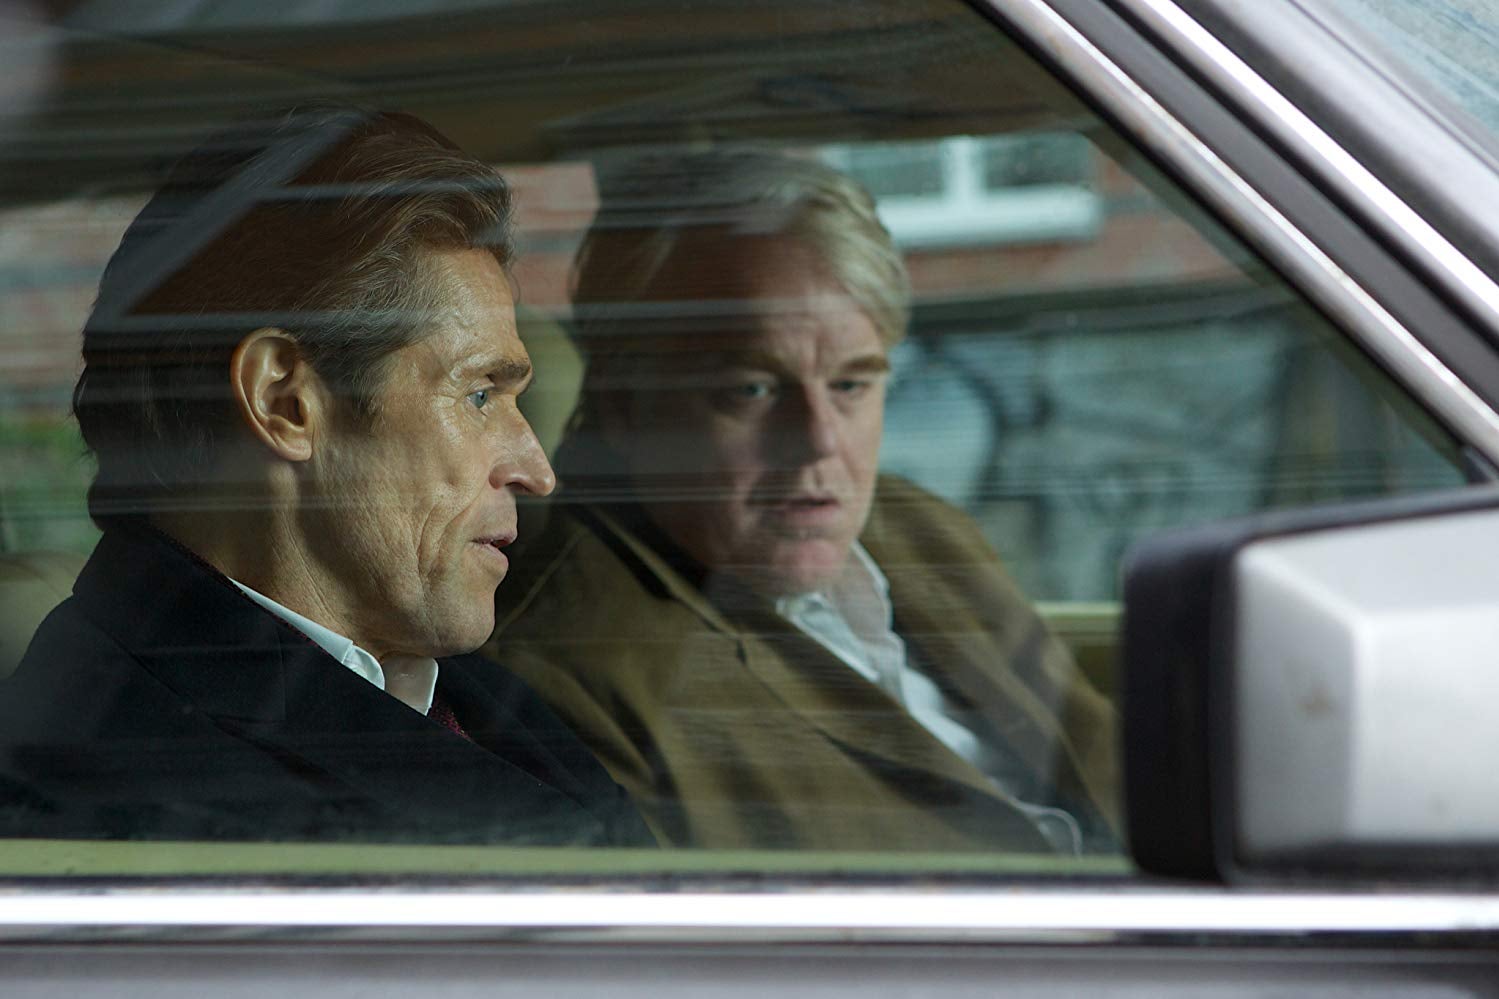 Willem Dafoe and Phillip Seymour Hoffman sit in a car.